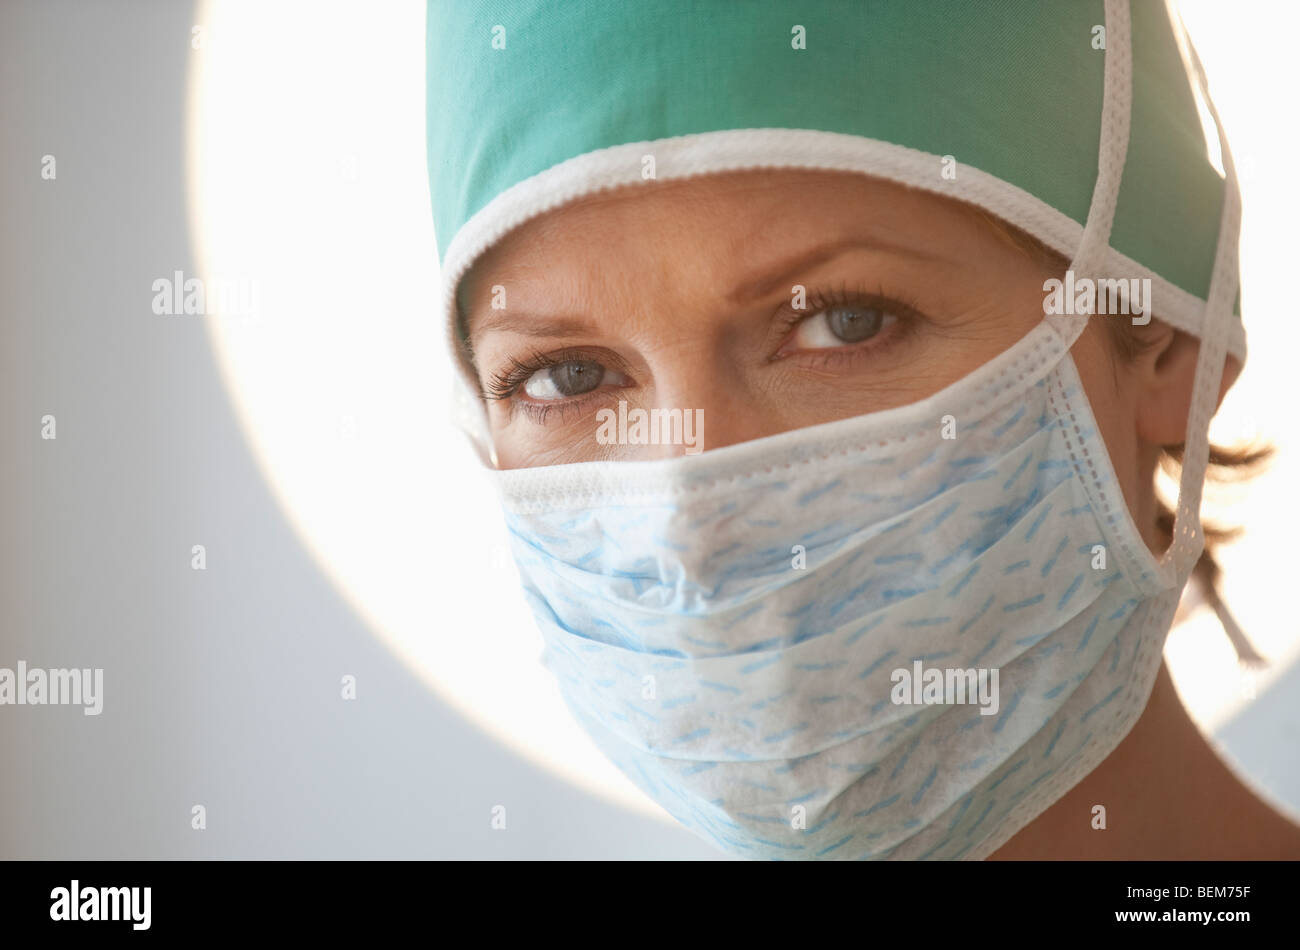 Female doctor with surgical mask Stock Photo